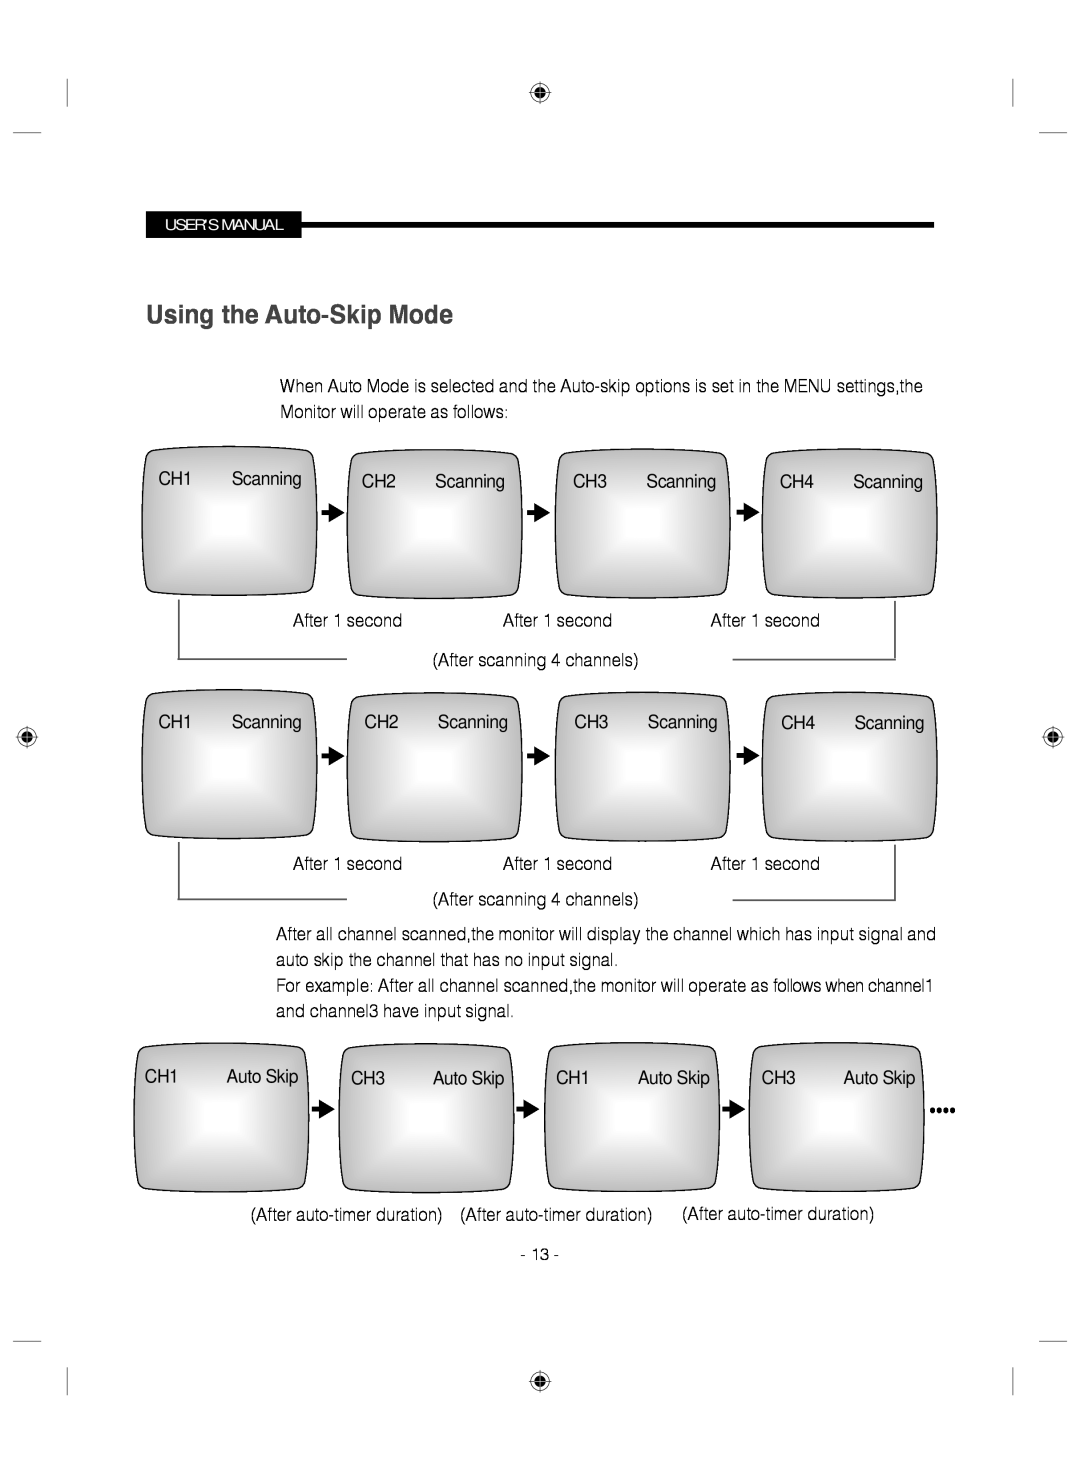 Samsung SMC-145 manual x, Using the Auto-Skip Mode, After scanning 4 channels 